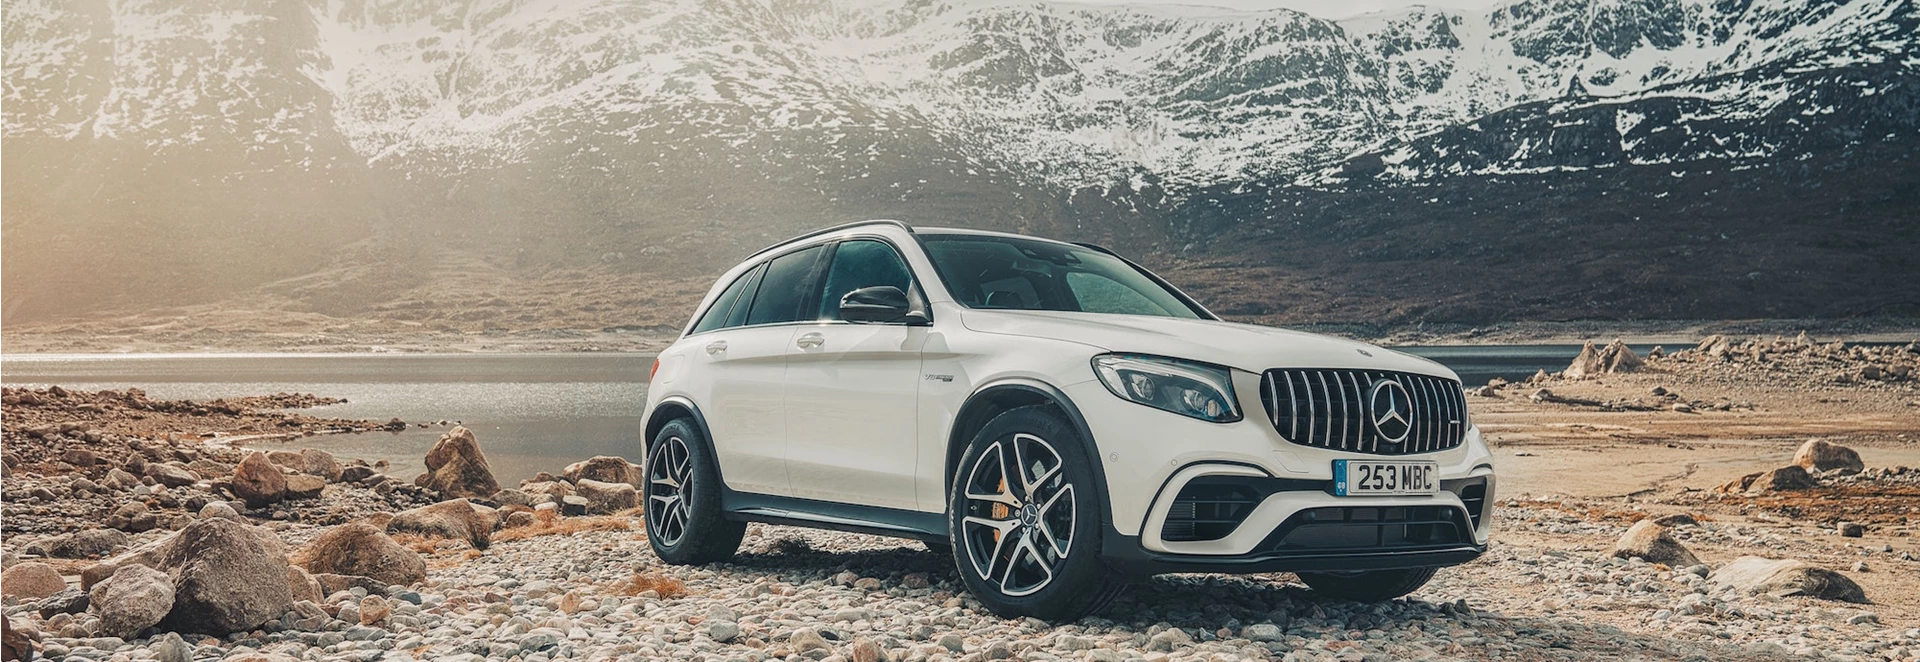 2018 Mercedes-AMG GLC 63 S Review